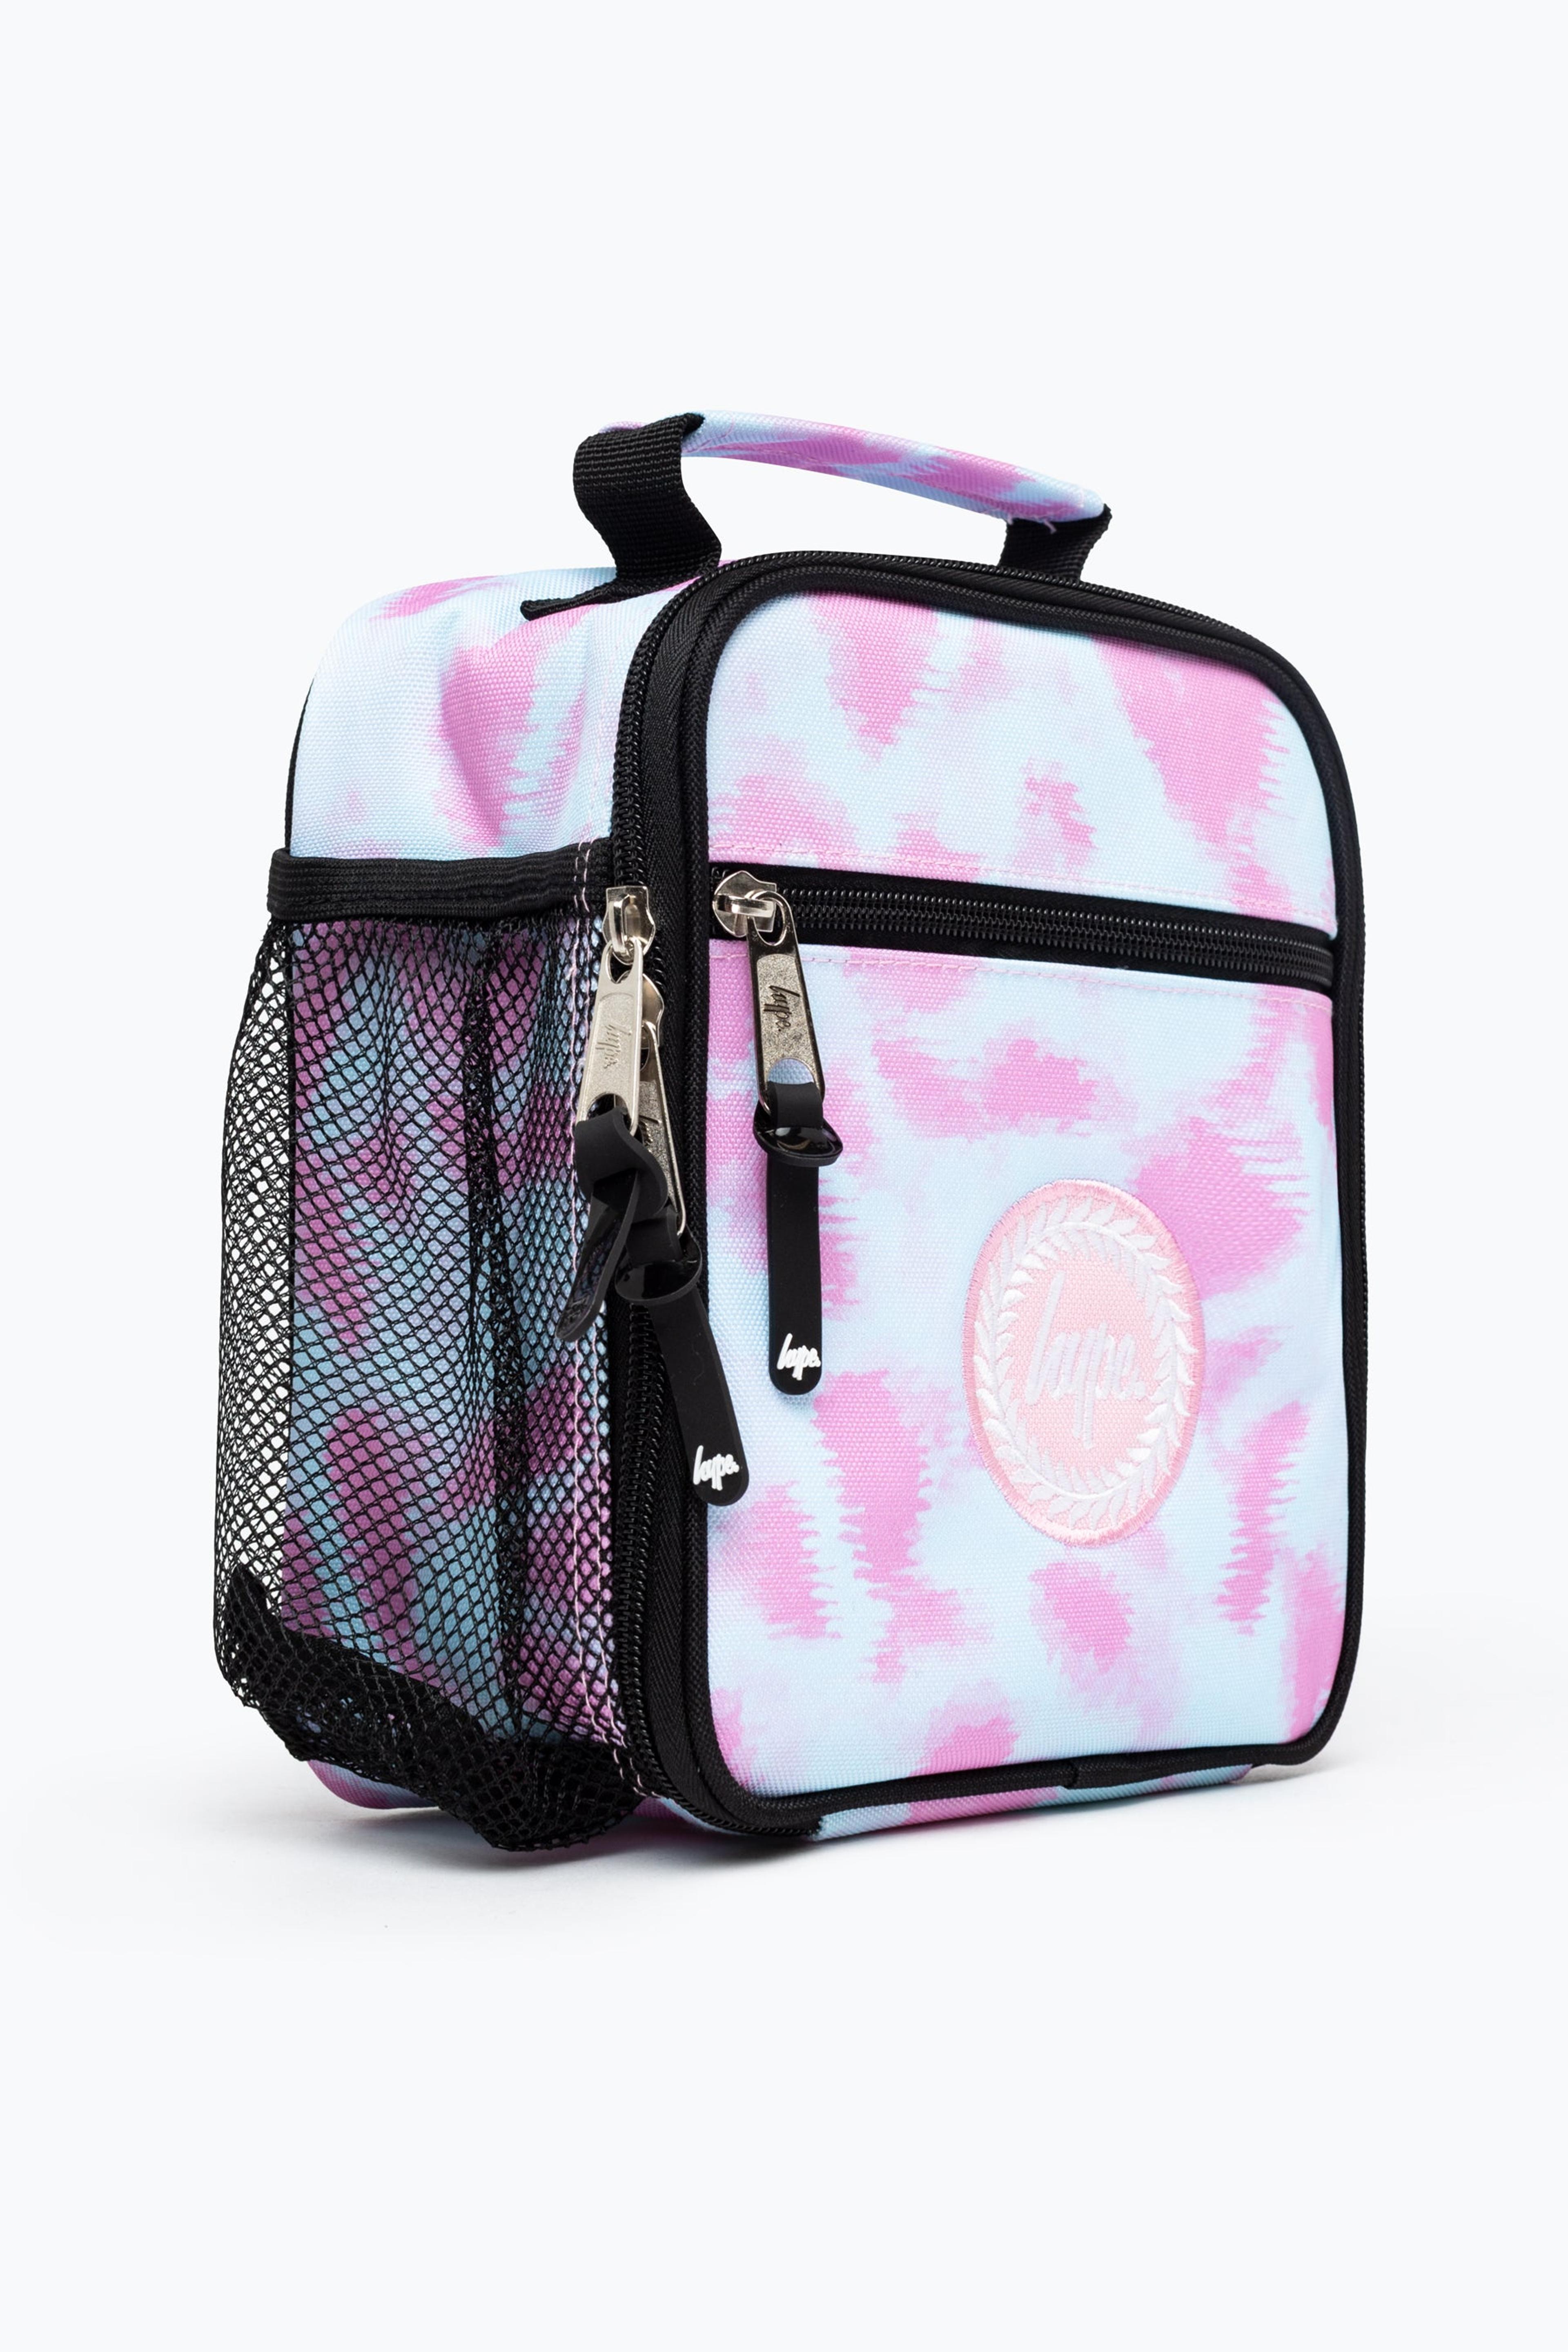 Alternate View 1 of HYPE UNISEX SPLODGE TIE DYE BLUE AND LILAC CREST LUNCHBOX